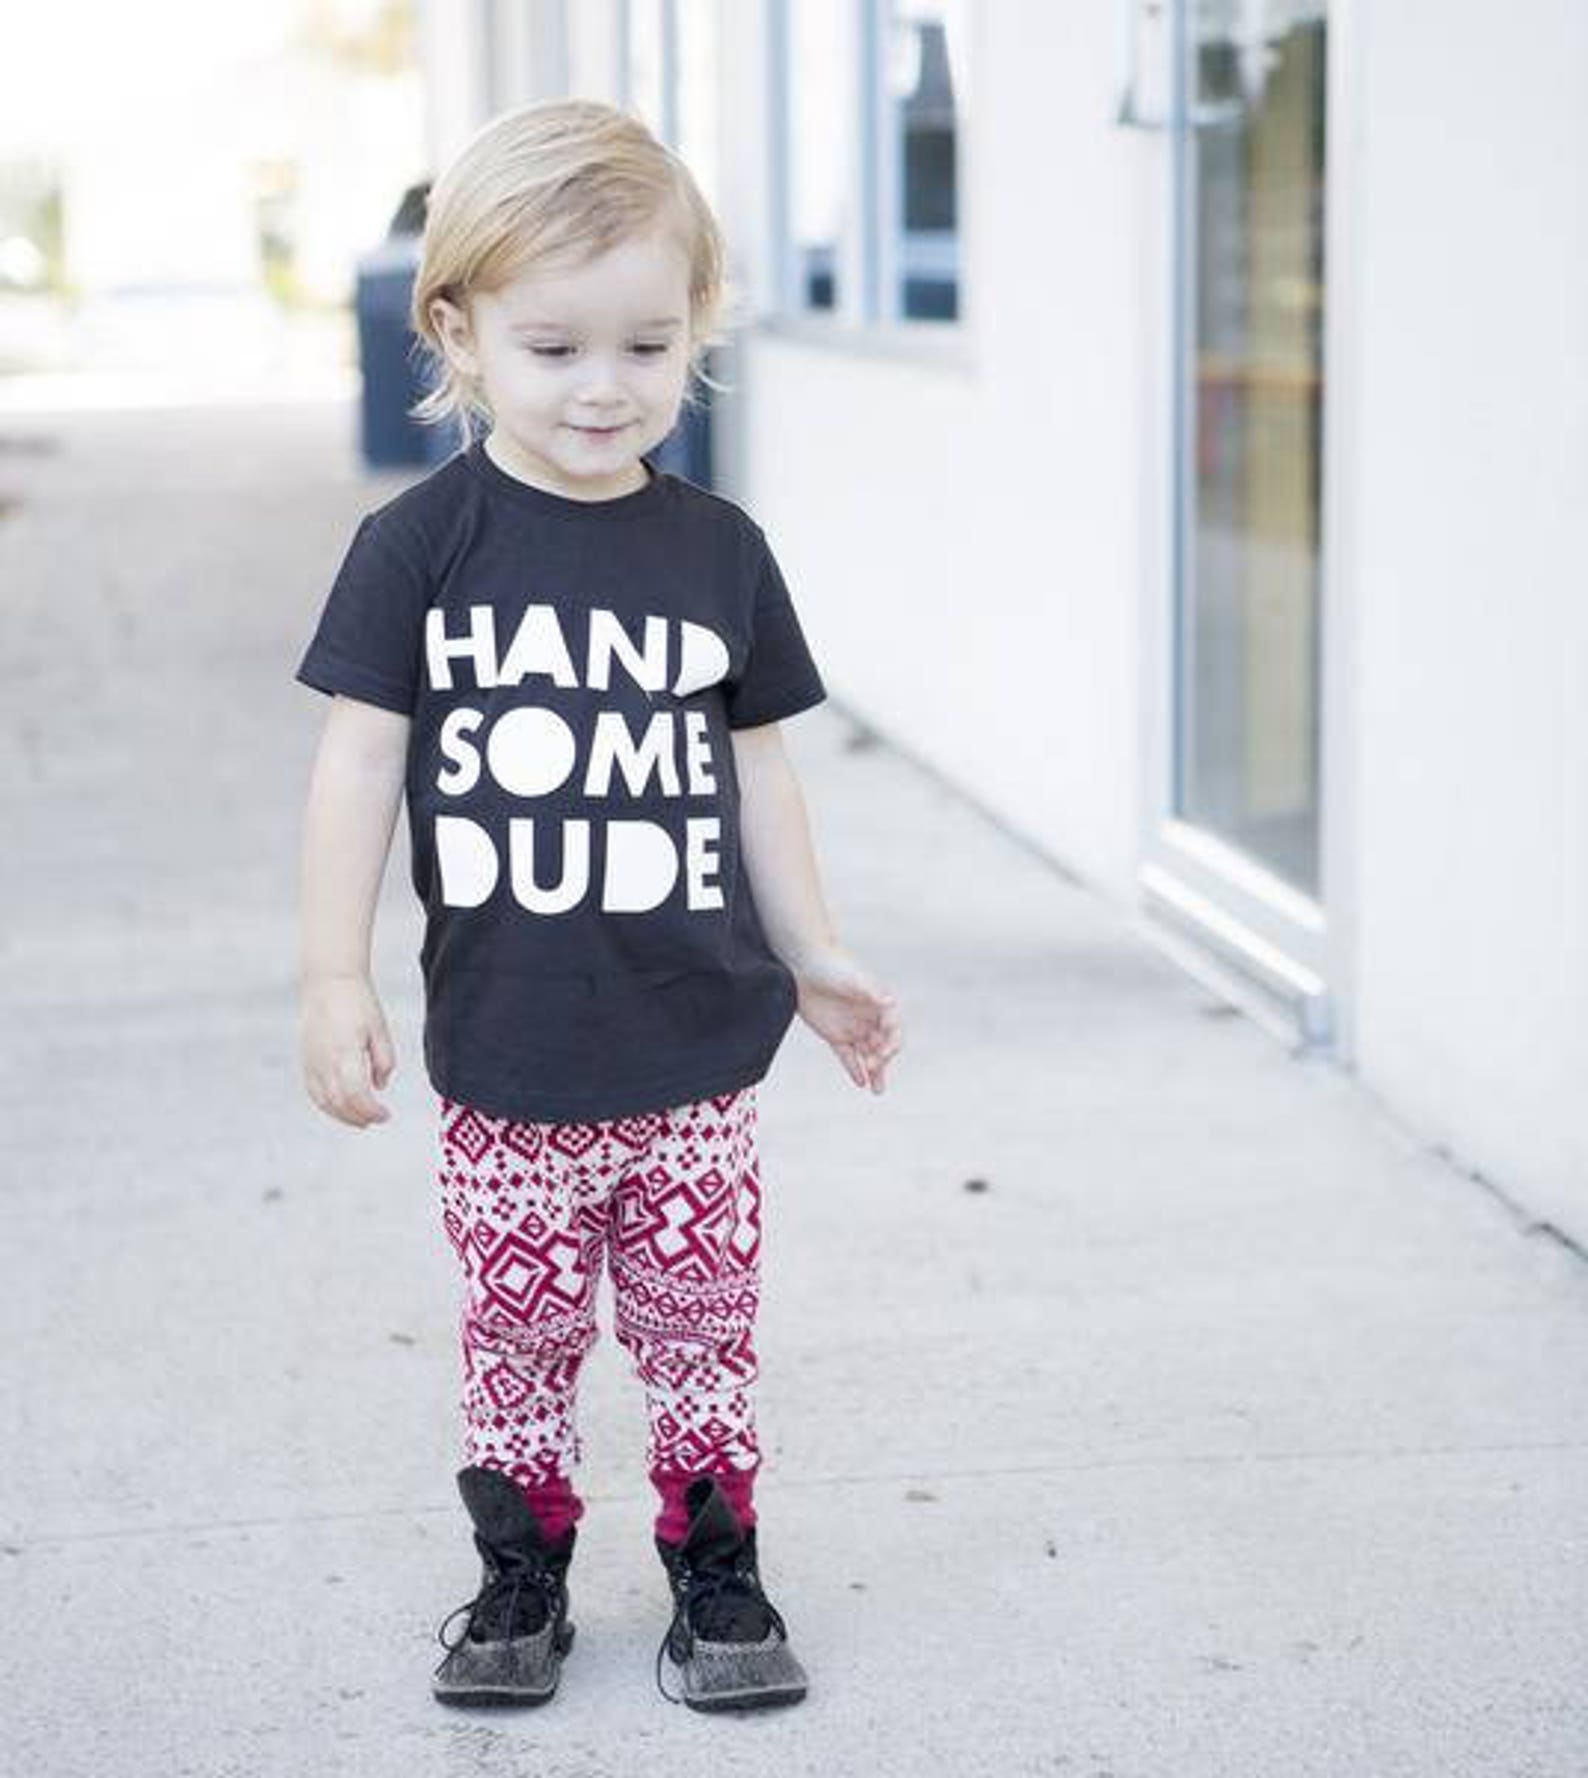 Handsome Dude Shirt Stylish Baby Boy Clothes Trendy Toddler Etsy